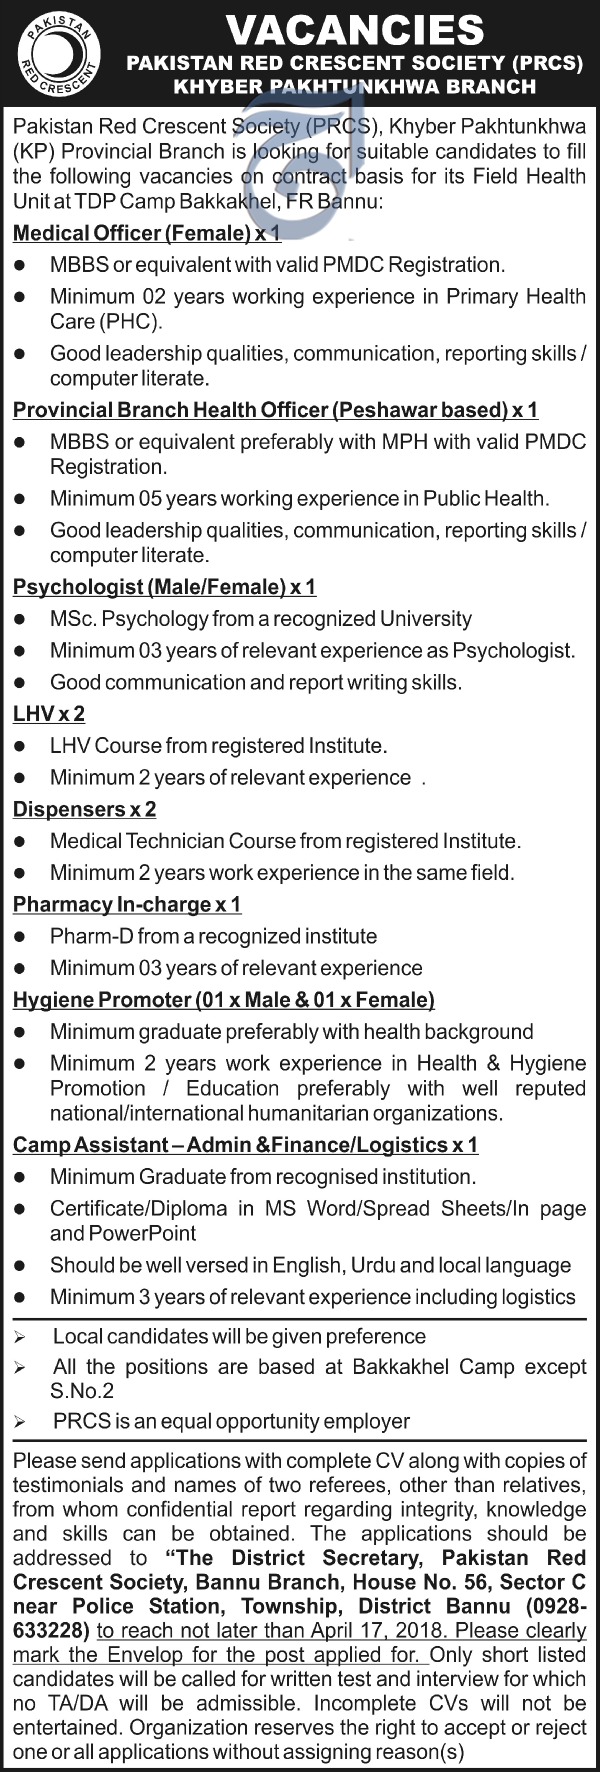 Jobs in Pakistan Red Crescent Society 13 April 2018